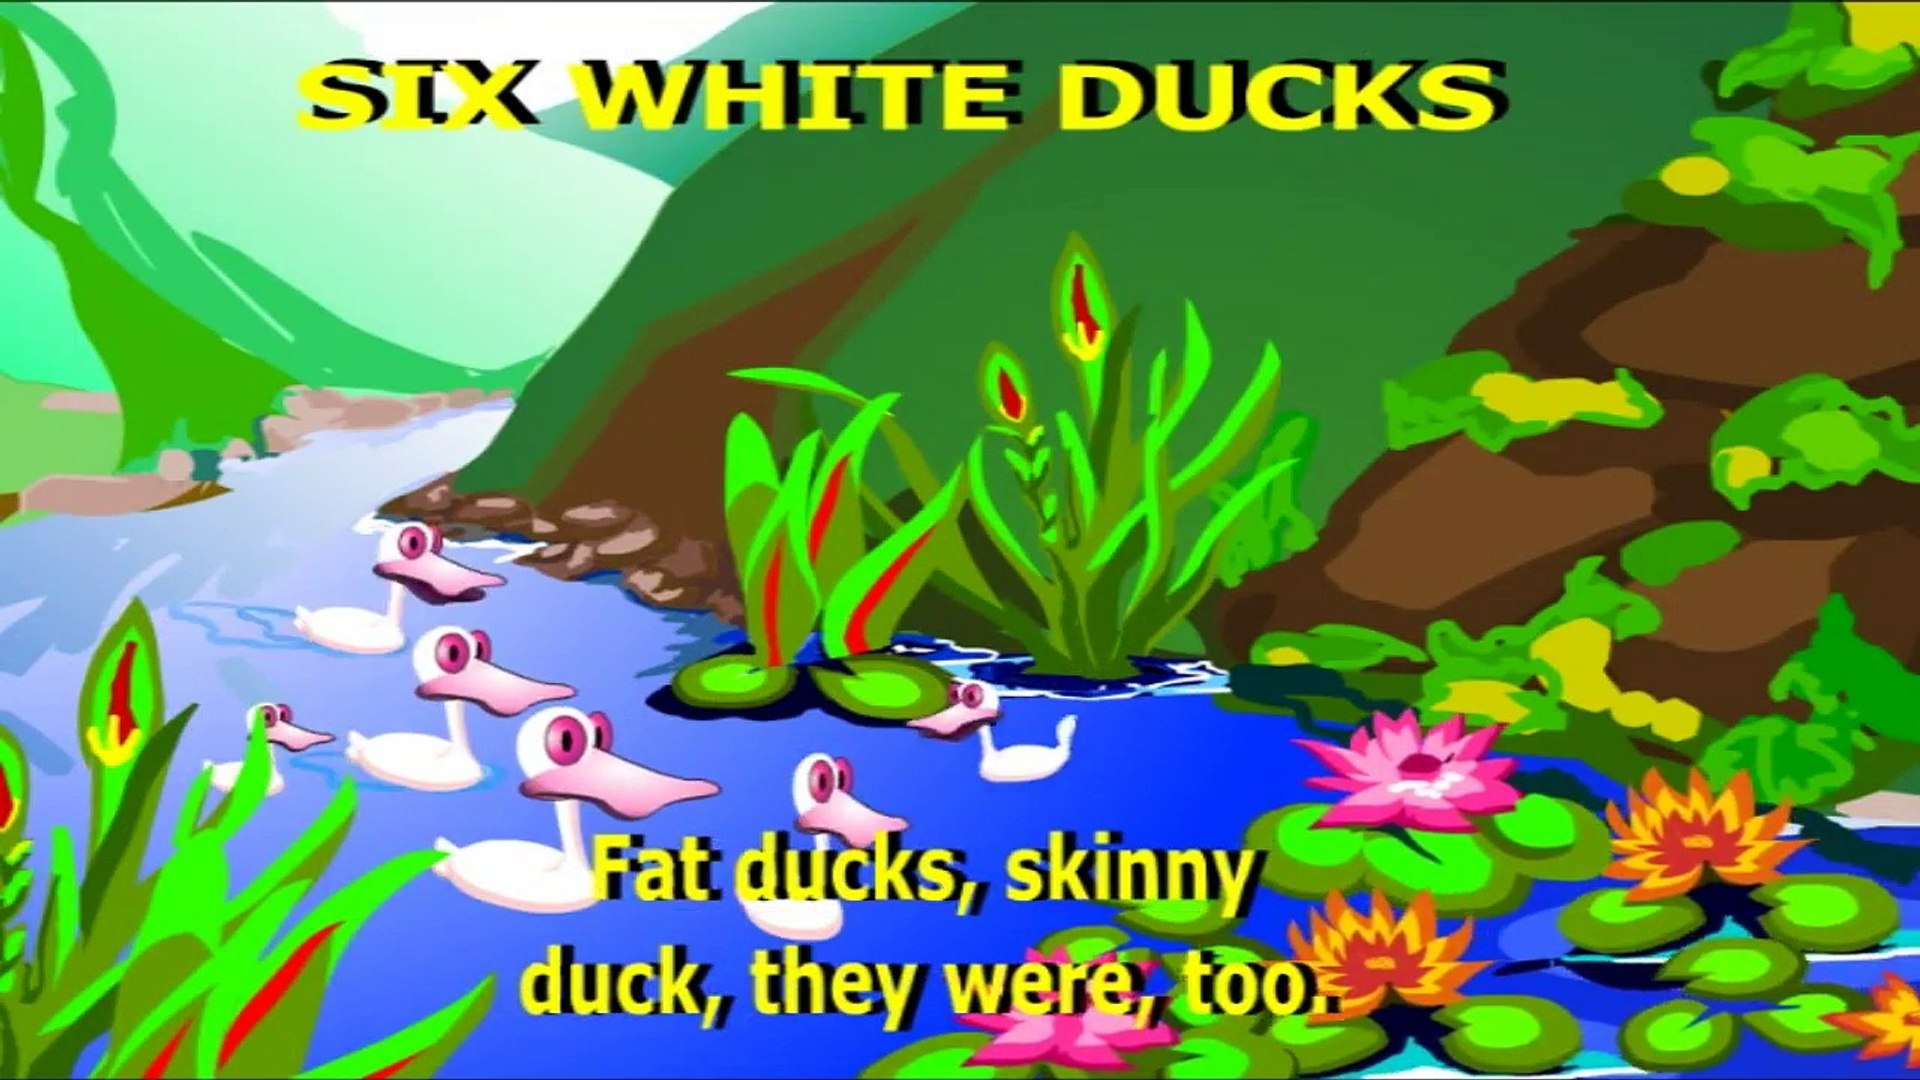 Six White Ducks ## Melodious English Rhyme - Videos For Kids Education